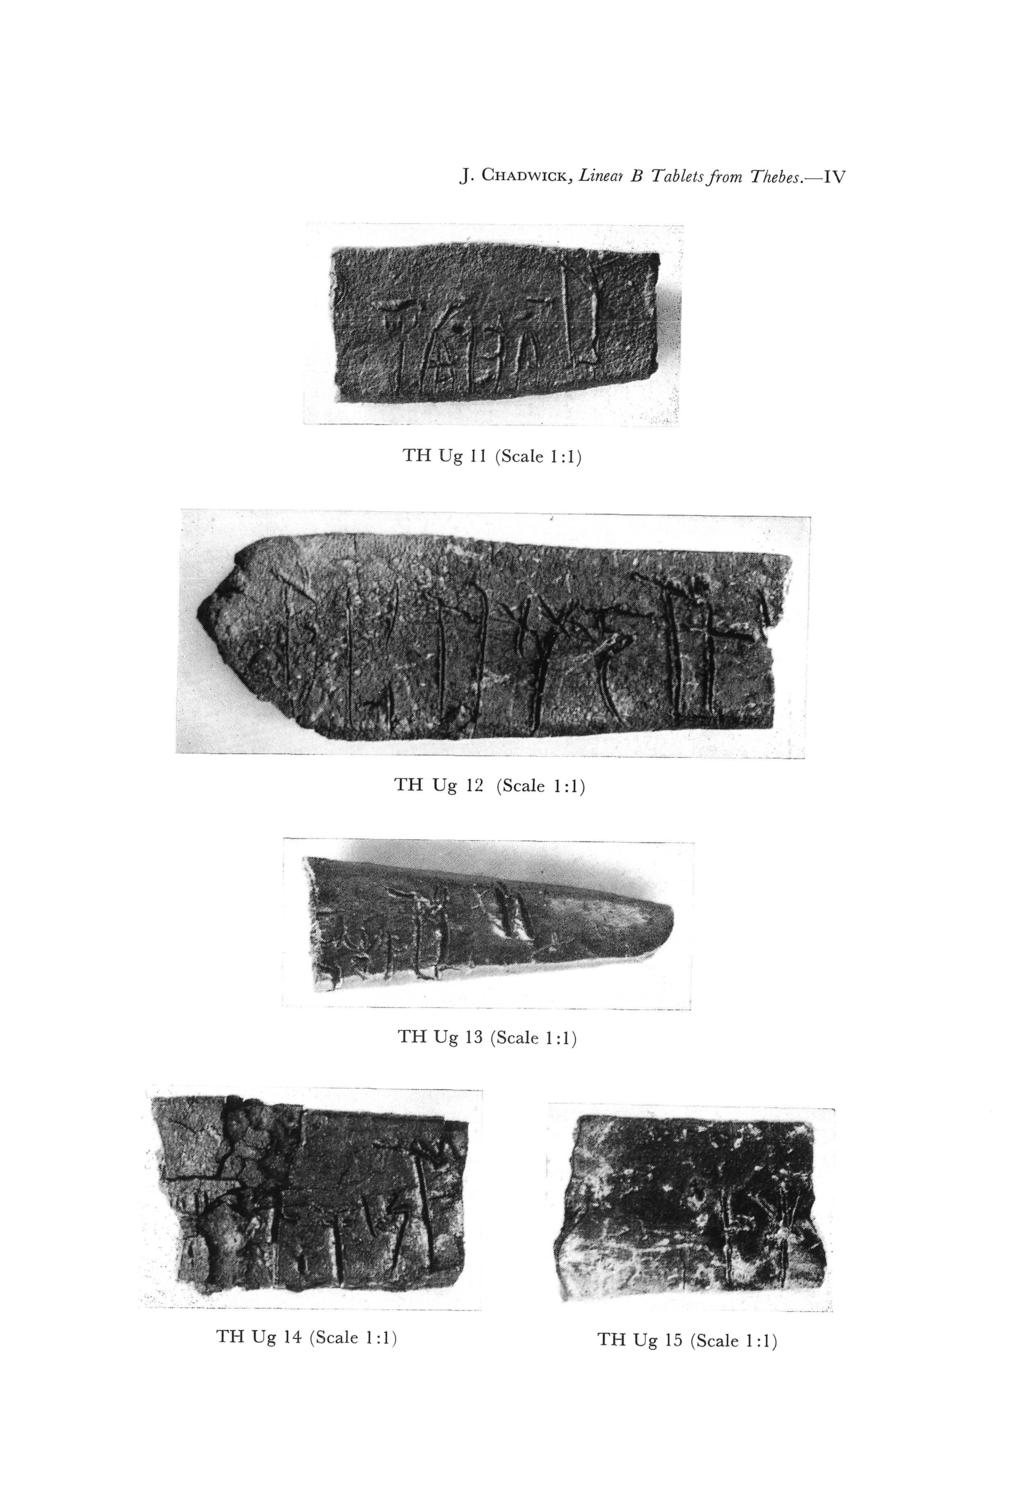 J. CHADWICK,, Linear B Tablets from Thebes.